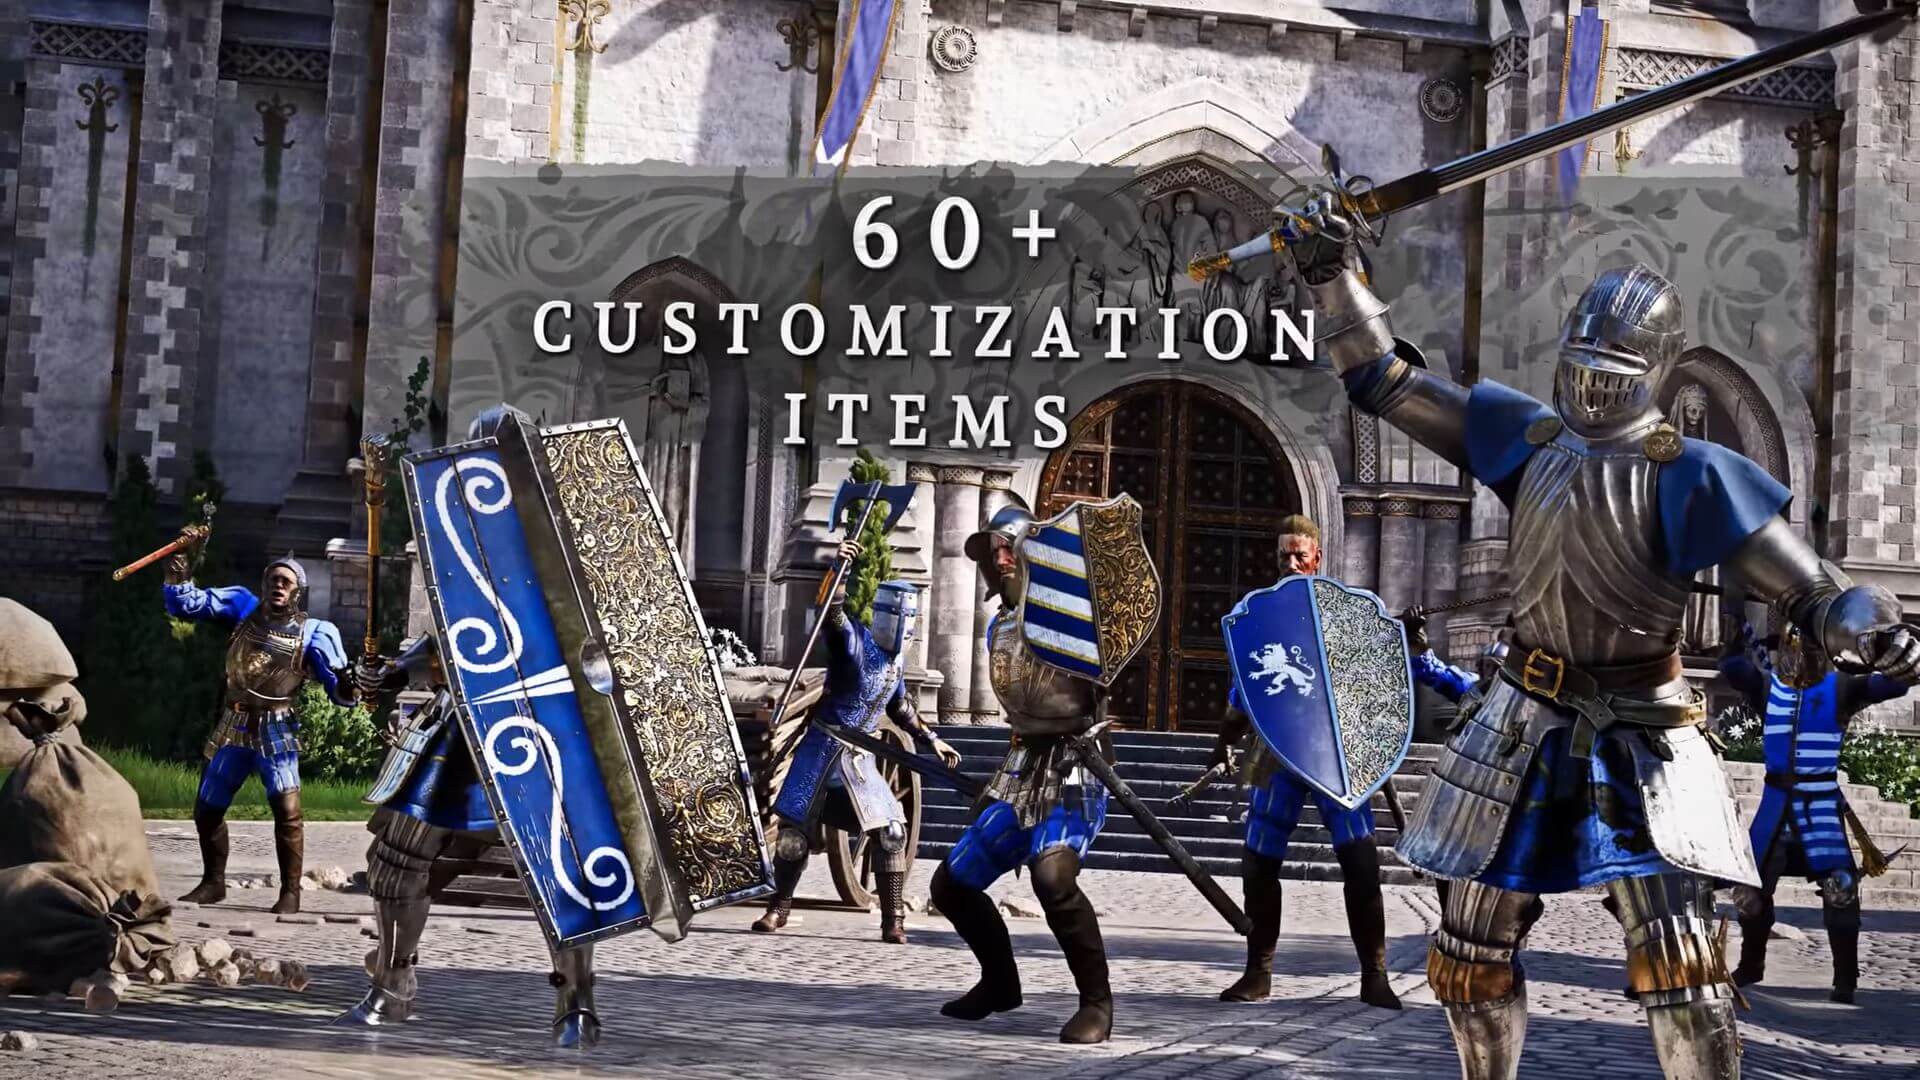 Some of the new customization items in the new Chivalry 2 update